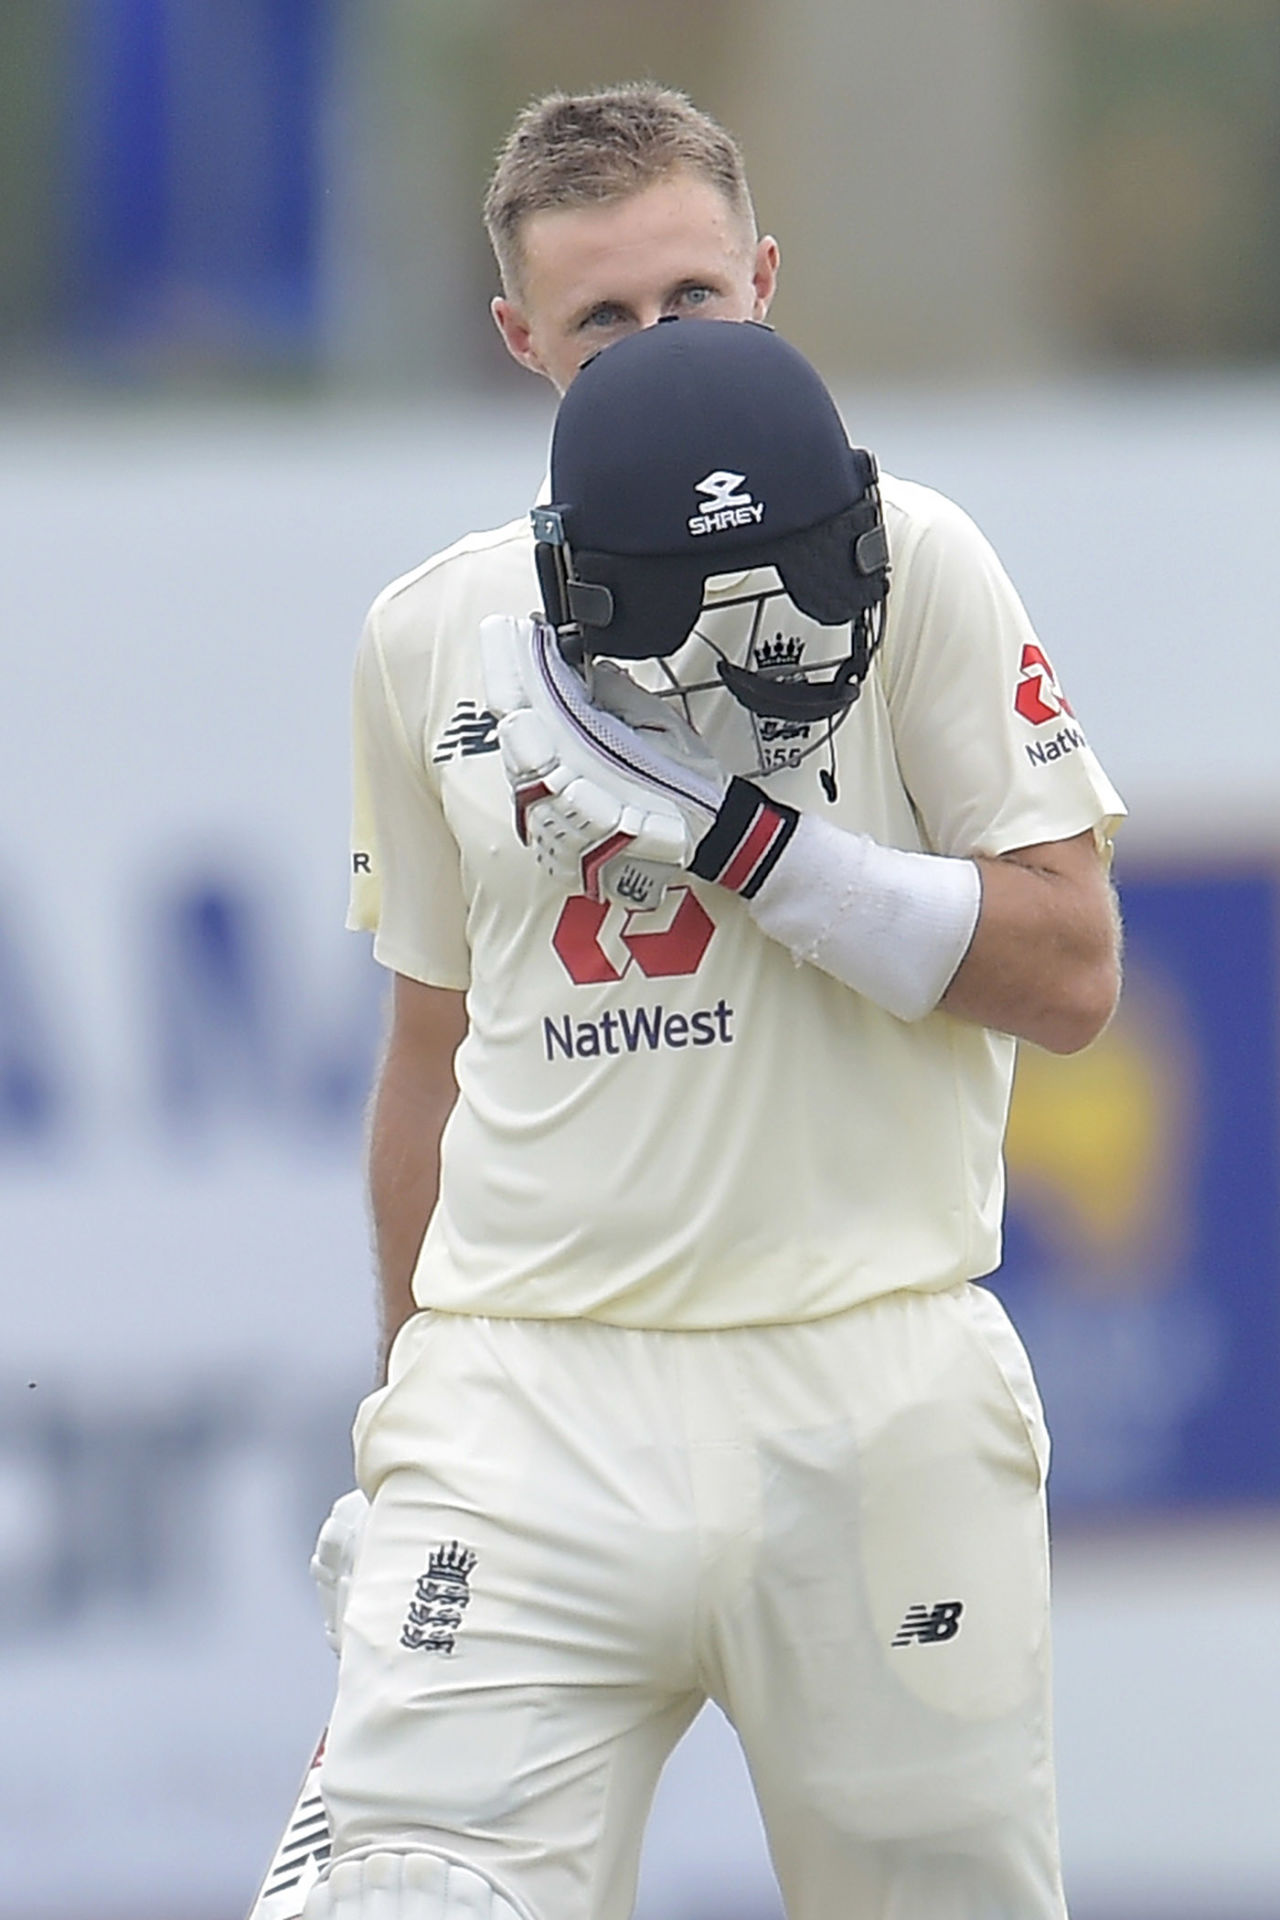 Joe Root kisses the badge after reaching 200, Sri Lanka v England, 1st Test, Galle, 3rd day, January 16, 2021